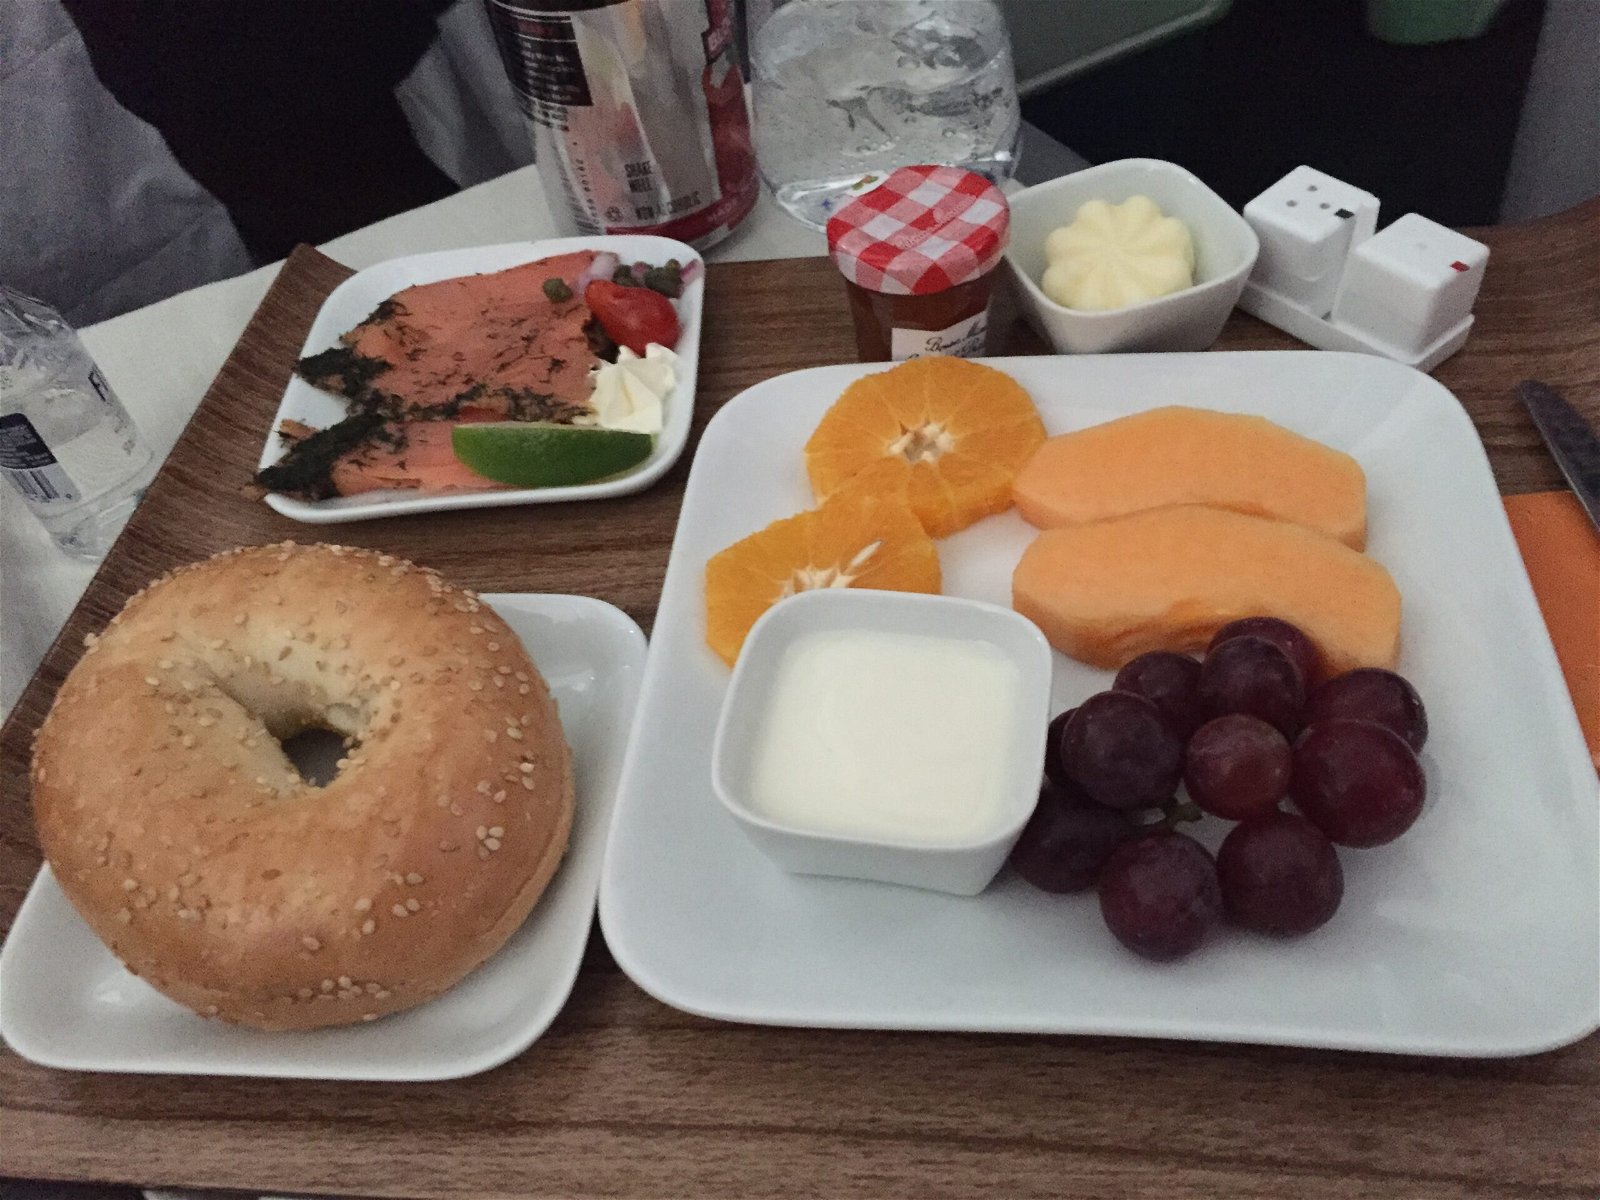 Bagel, lox and fruit